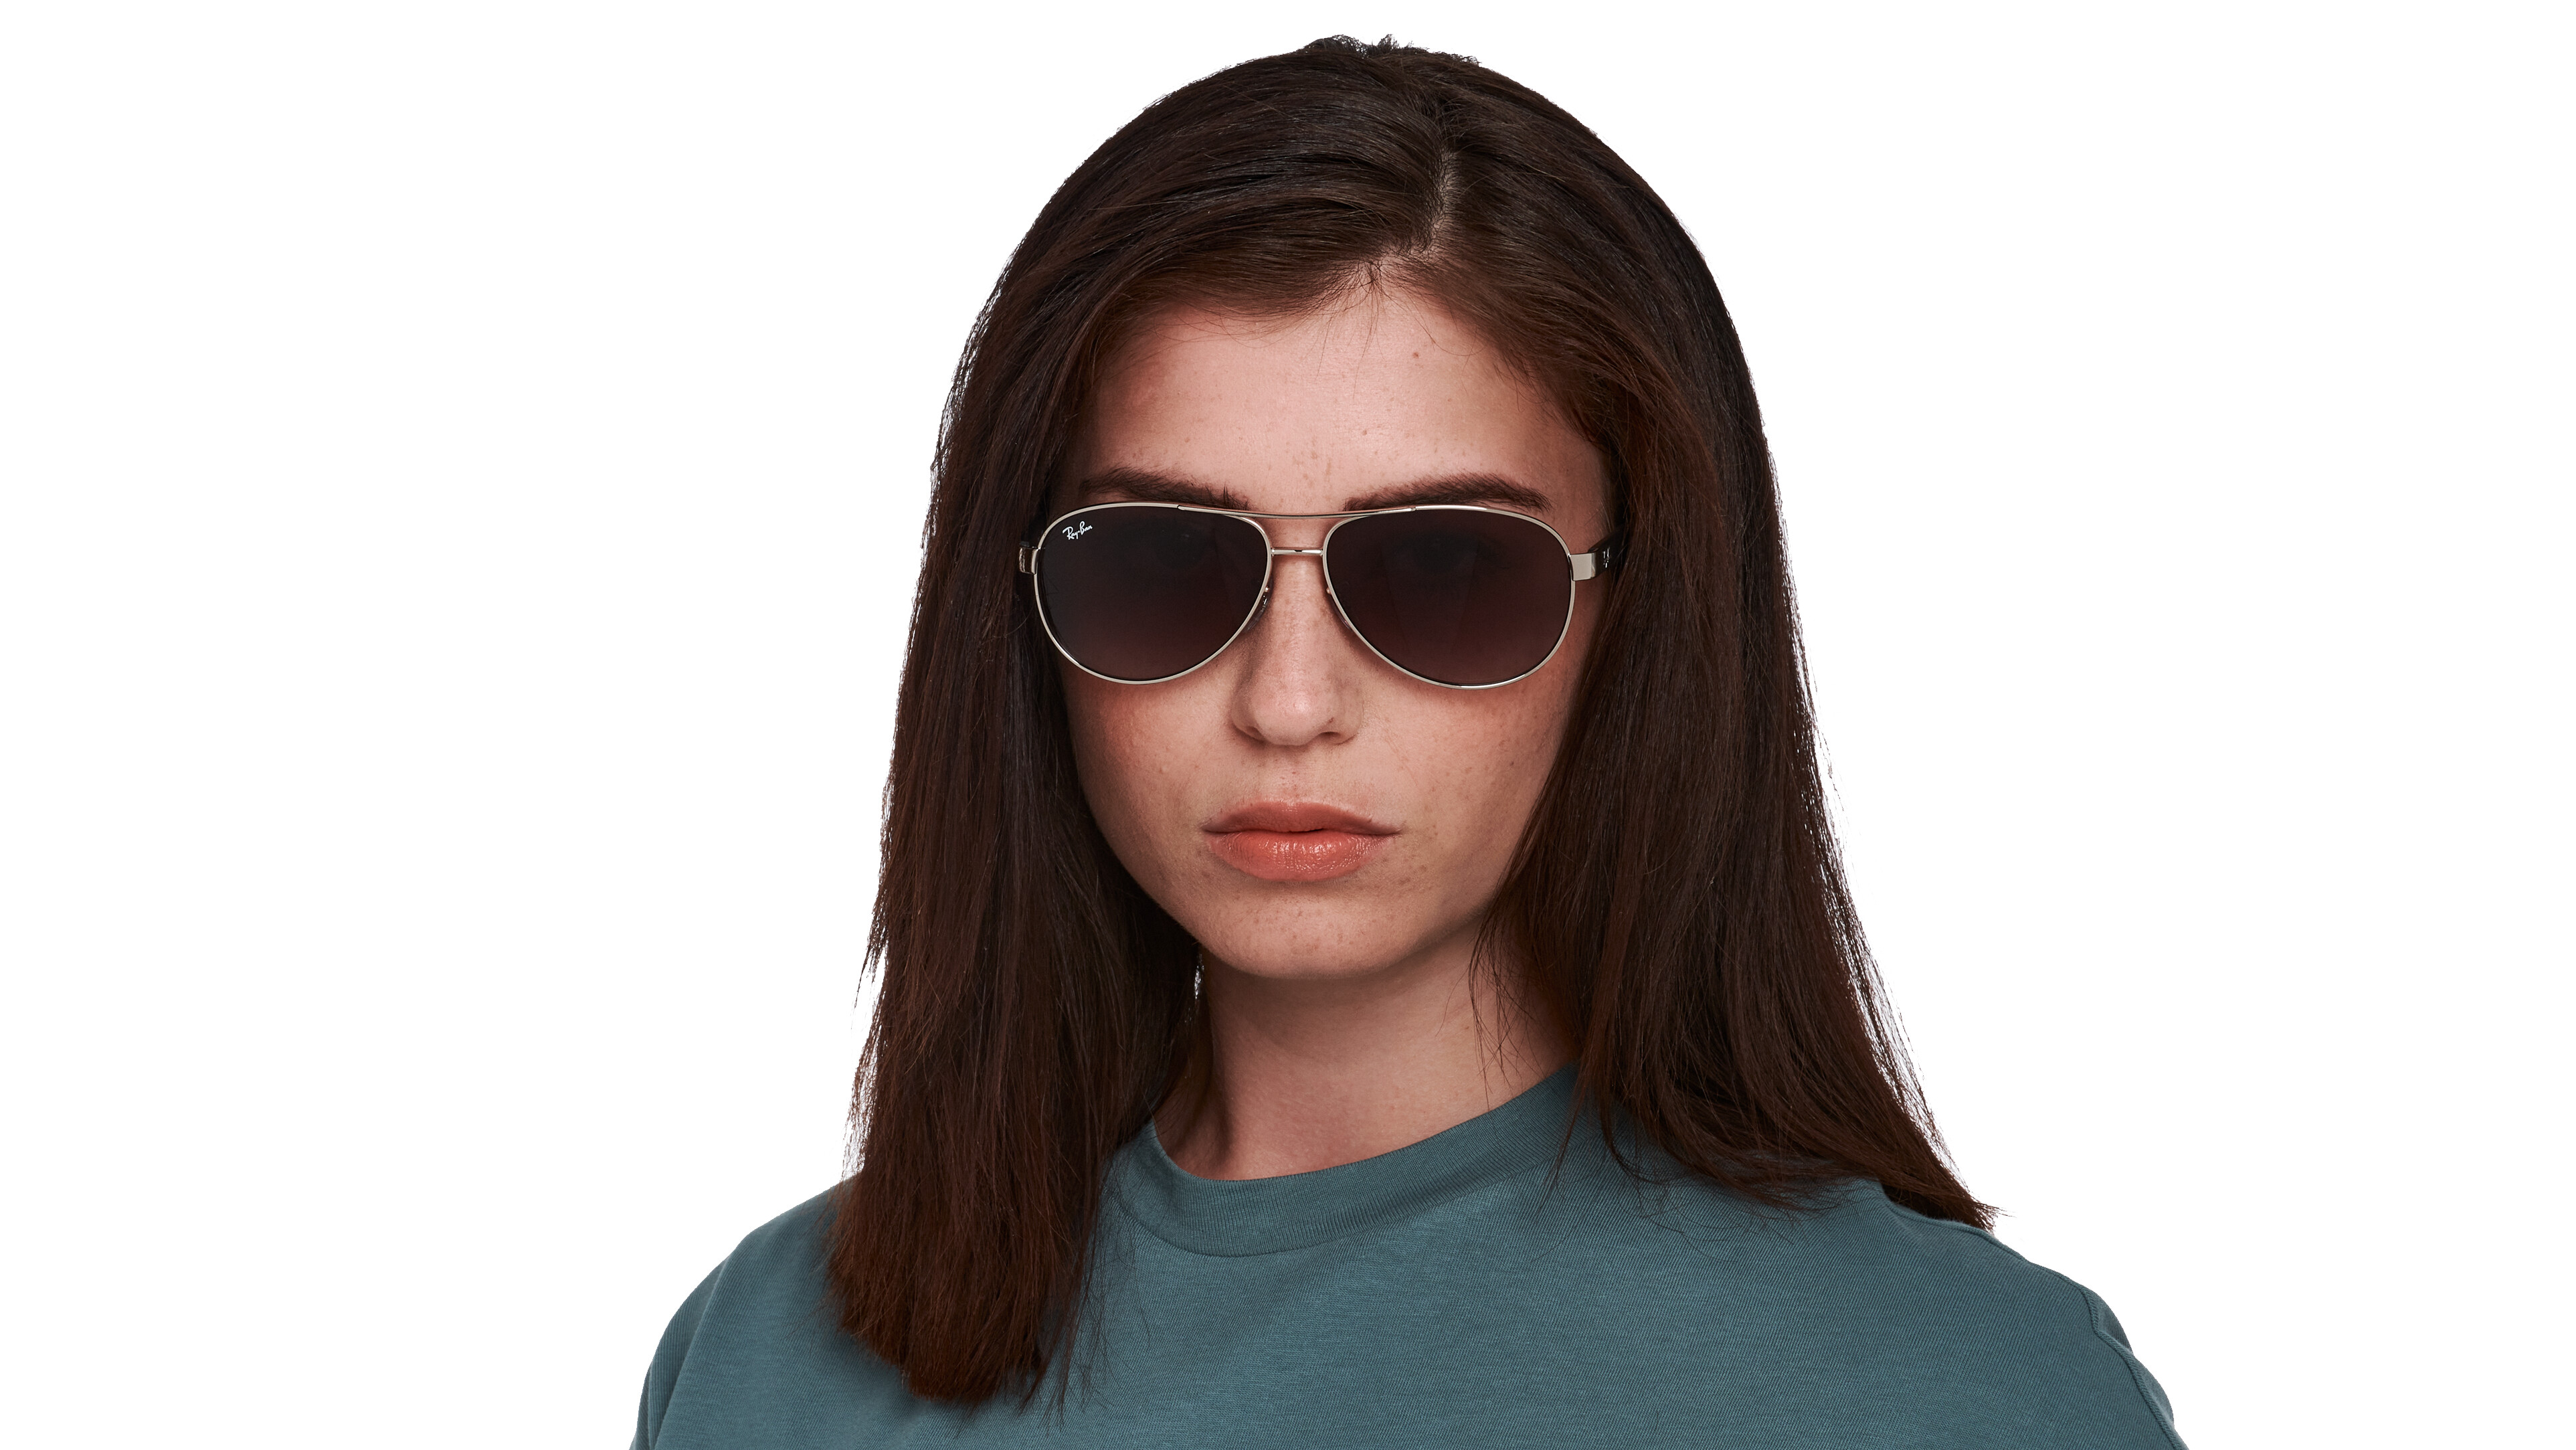 [products.image.on_model_female02] Ray-Ban 0RB3457 134/8G Sonnenbrille